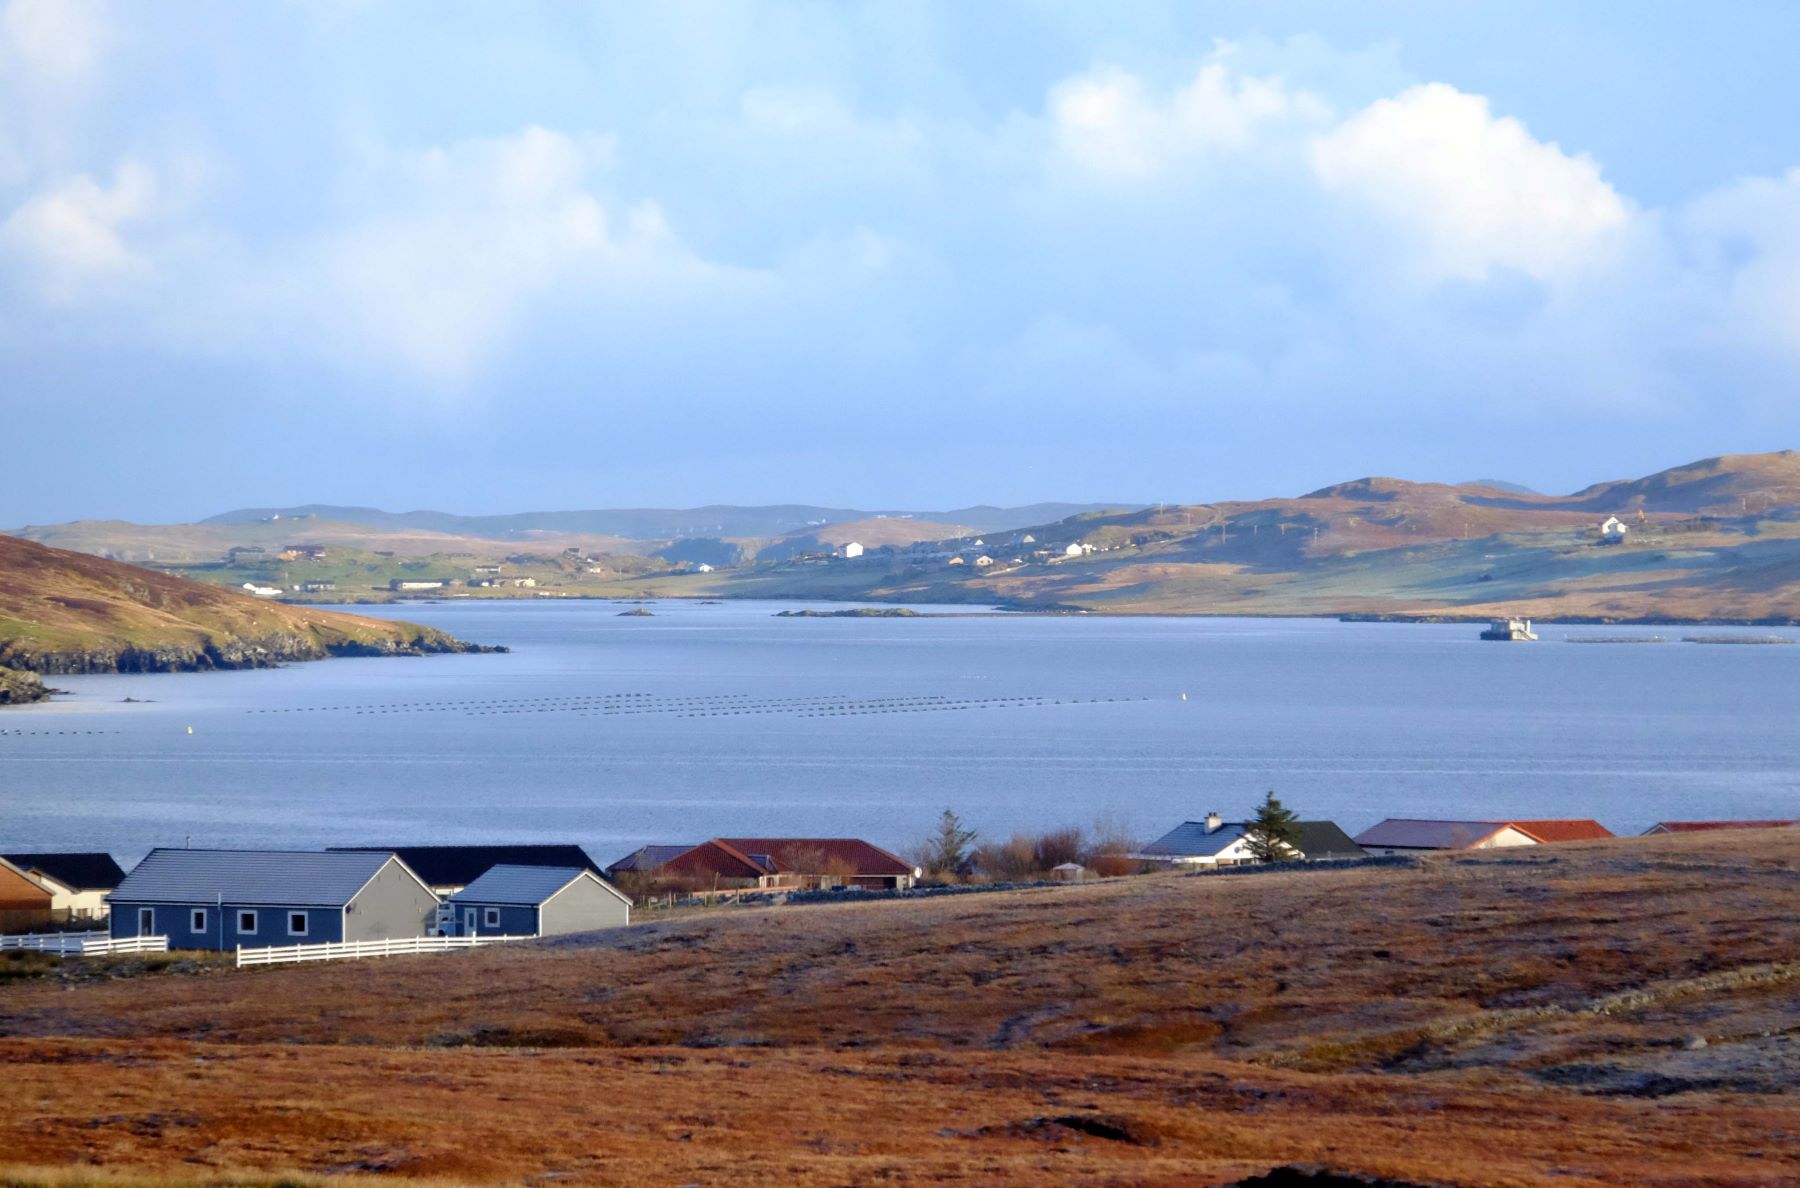 A coastal scene of wadbister voe & catfirth, with house dotting the shore and salmon farming activity visible on the water